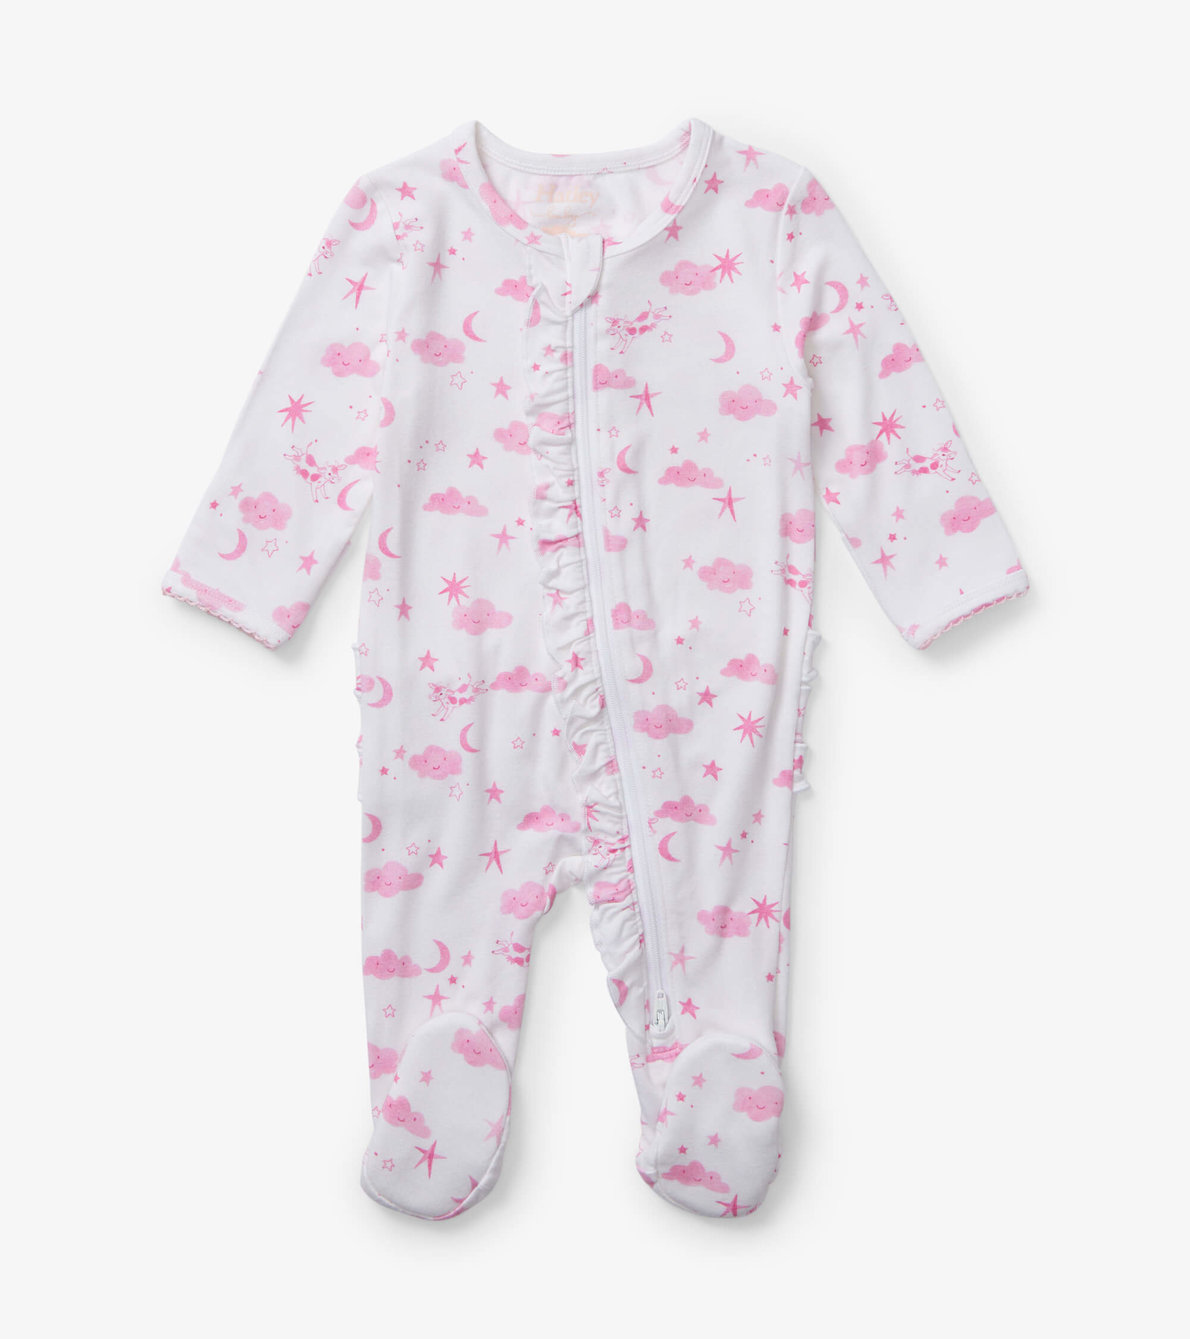 View larger image of Starry Night Pink Baby Ruffle Bum Footed Sleeper